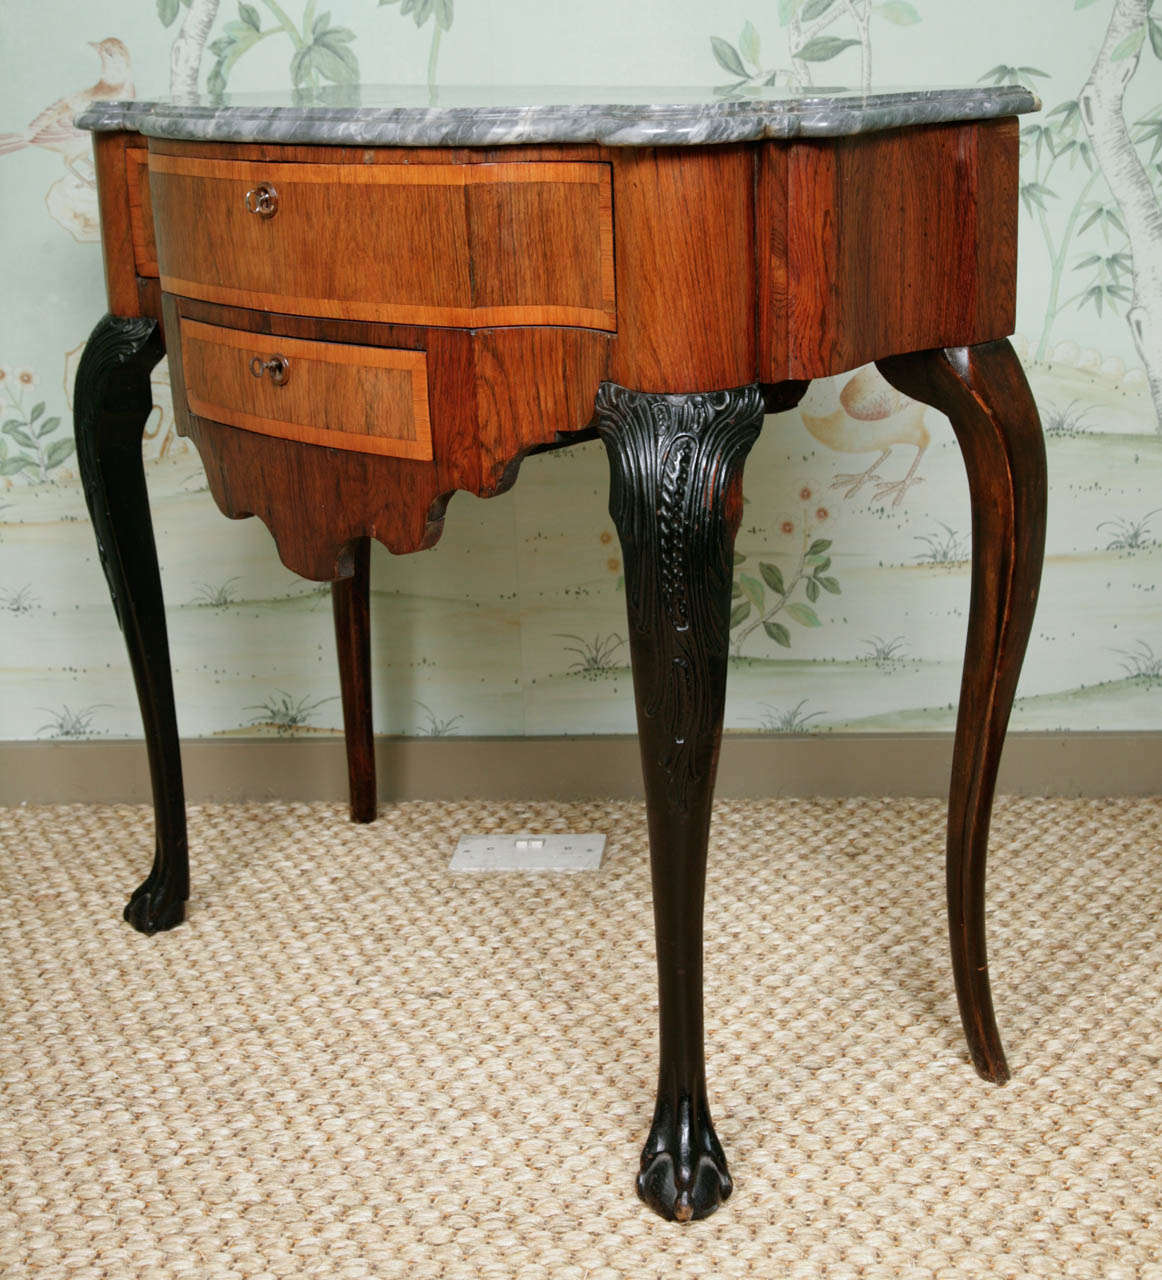 A Dutch 18th century side table, the shaped top with soft grey St. Anne Marble. Veneered in kingwood and walnut with a long drawer and smaller drawer below, raised on slender carved cabriole legs ending in ball and claw feet, circa 1740.